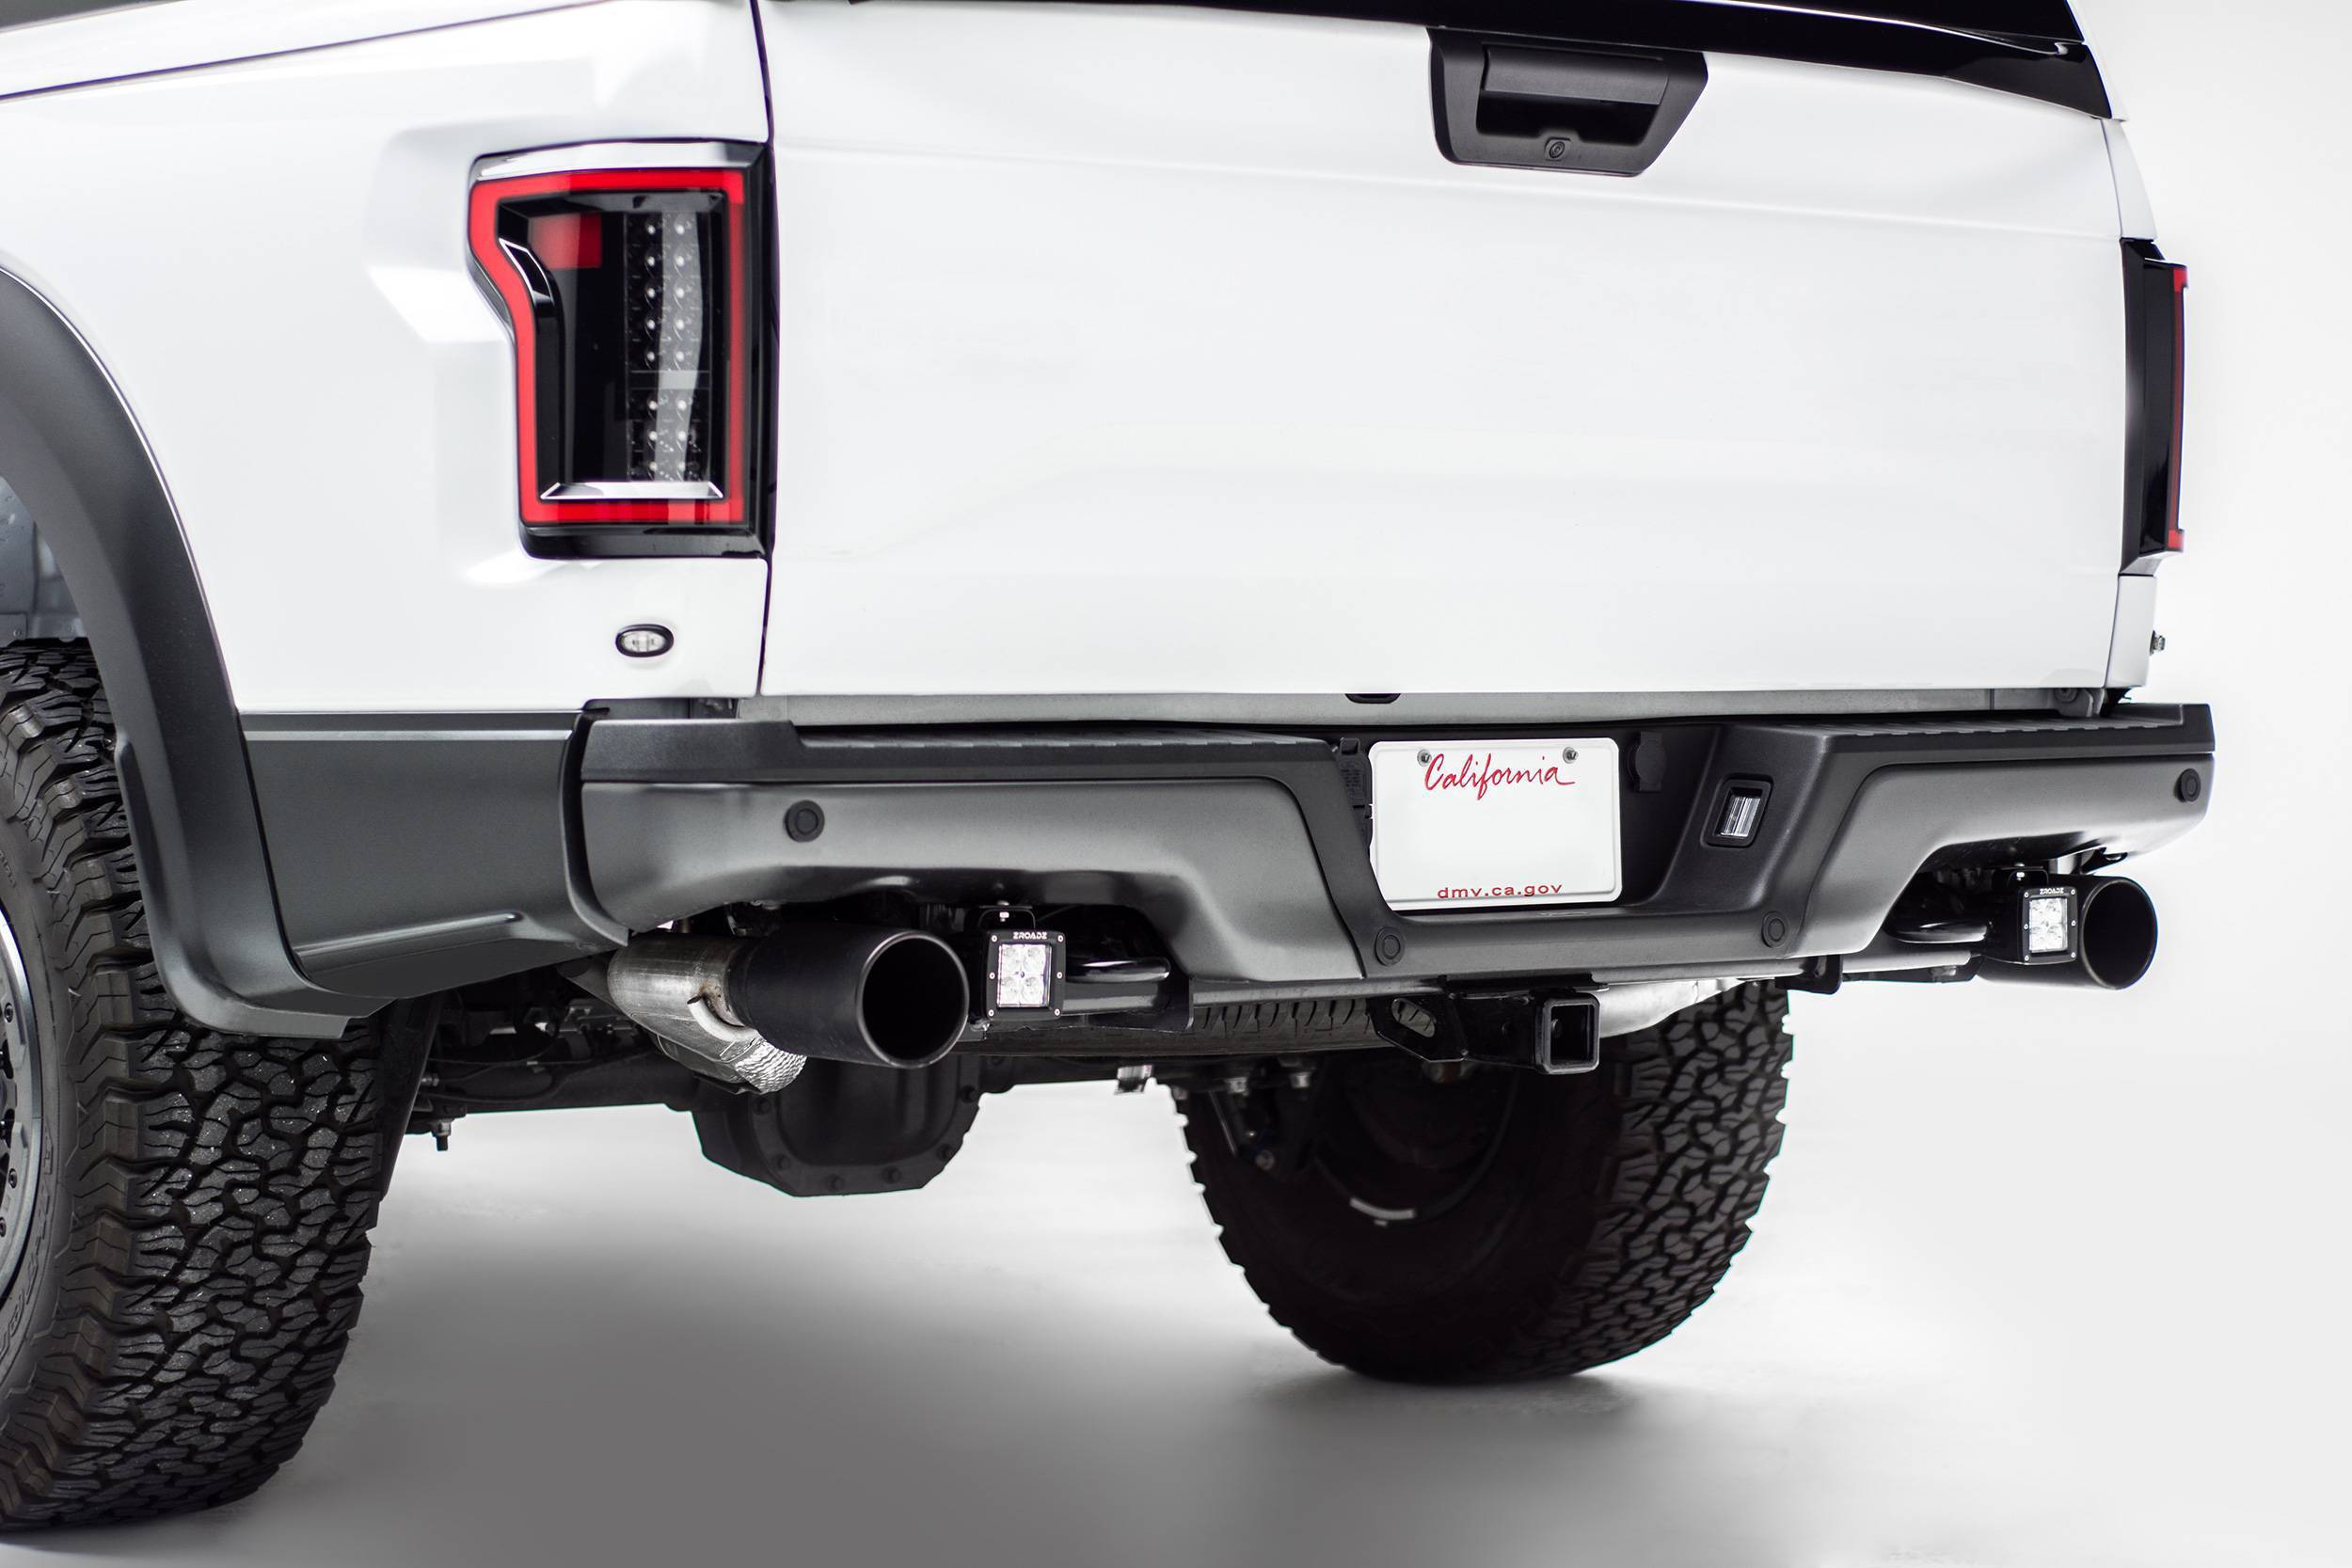 ZROADZ OFF ROAD PRODUCTS - 2017-2020 Ford F-150 Raptor Rear Bumper LED Kit with (2) 3 Inch LED Pod Lights - Part # Z385651-KIT